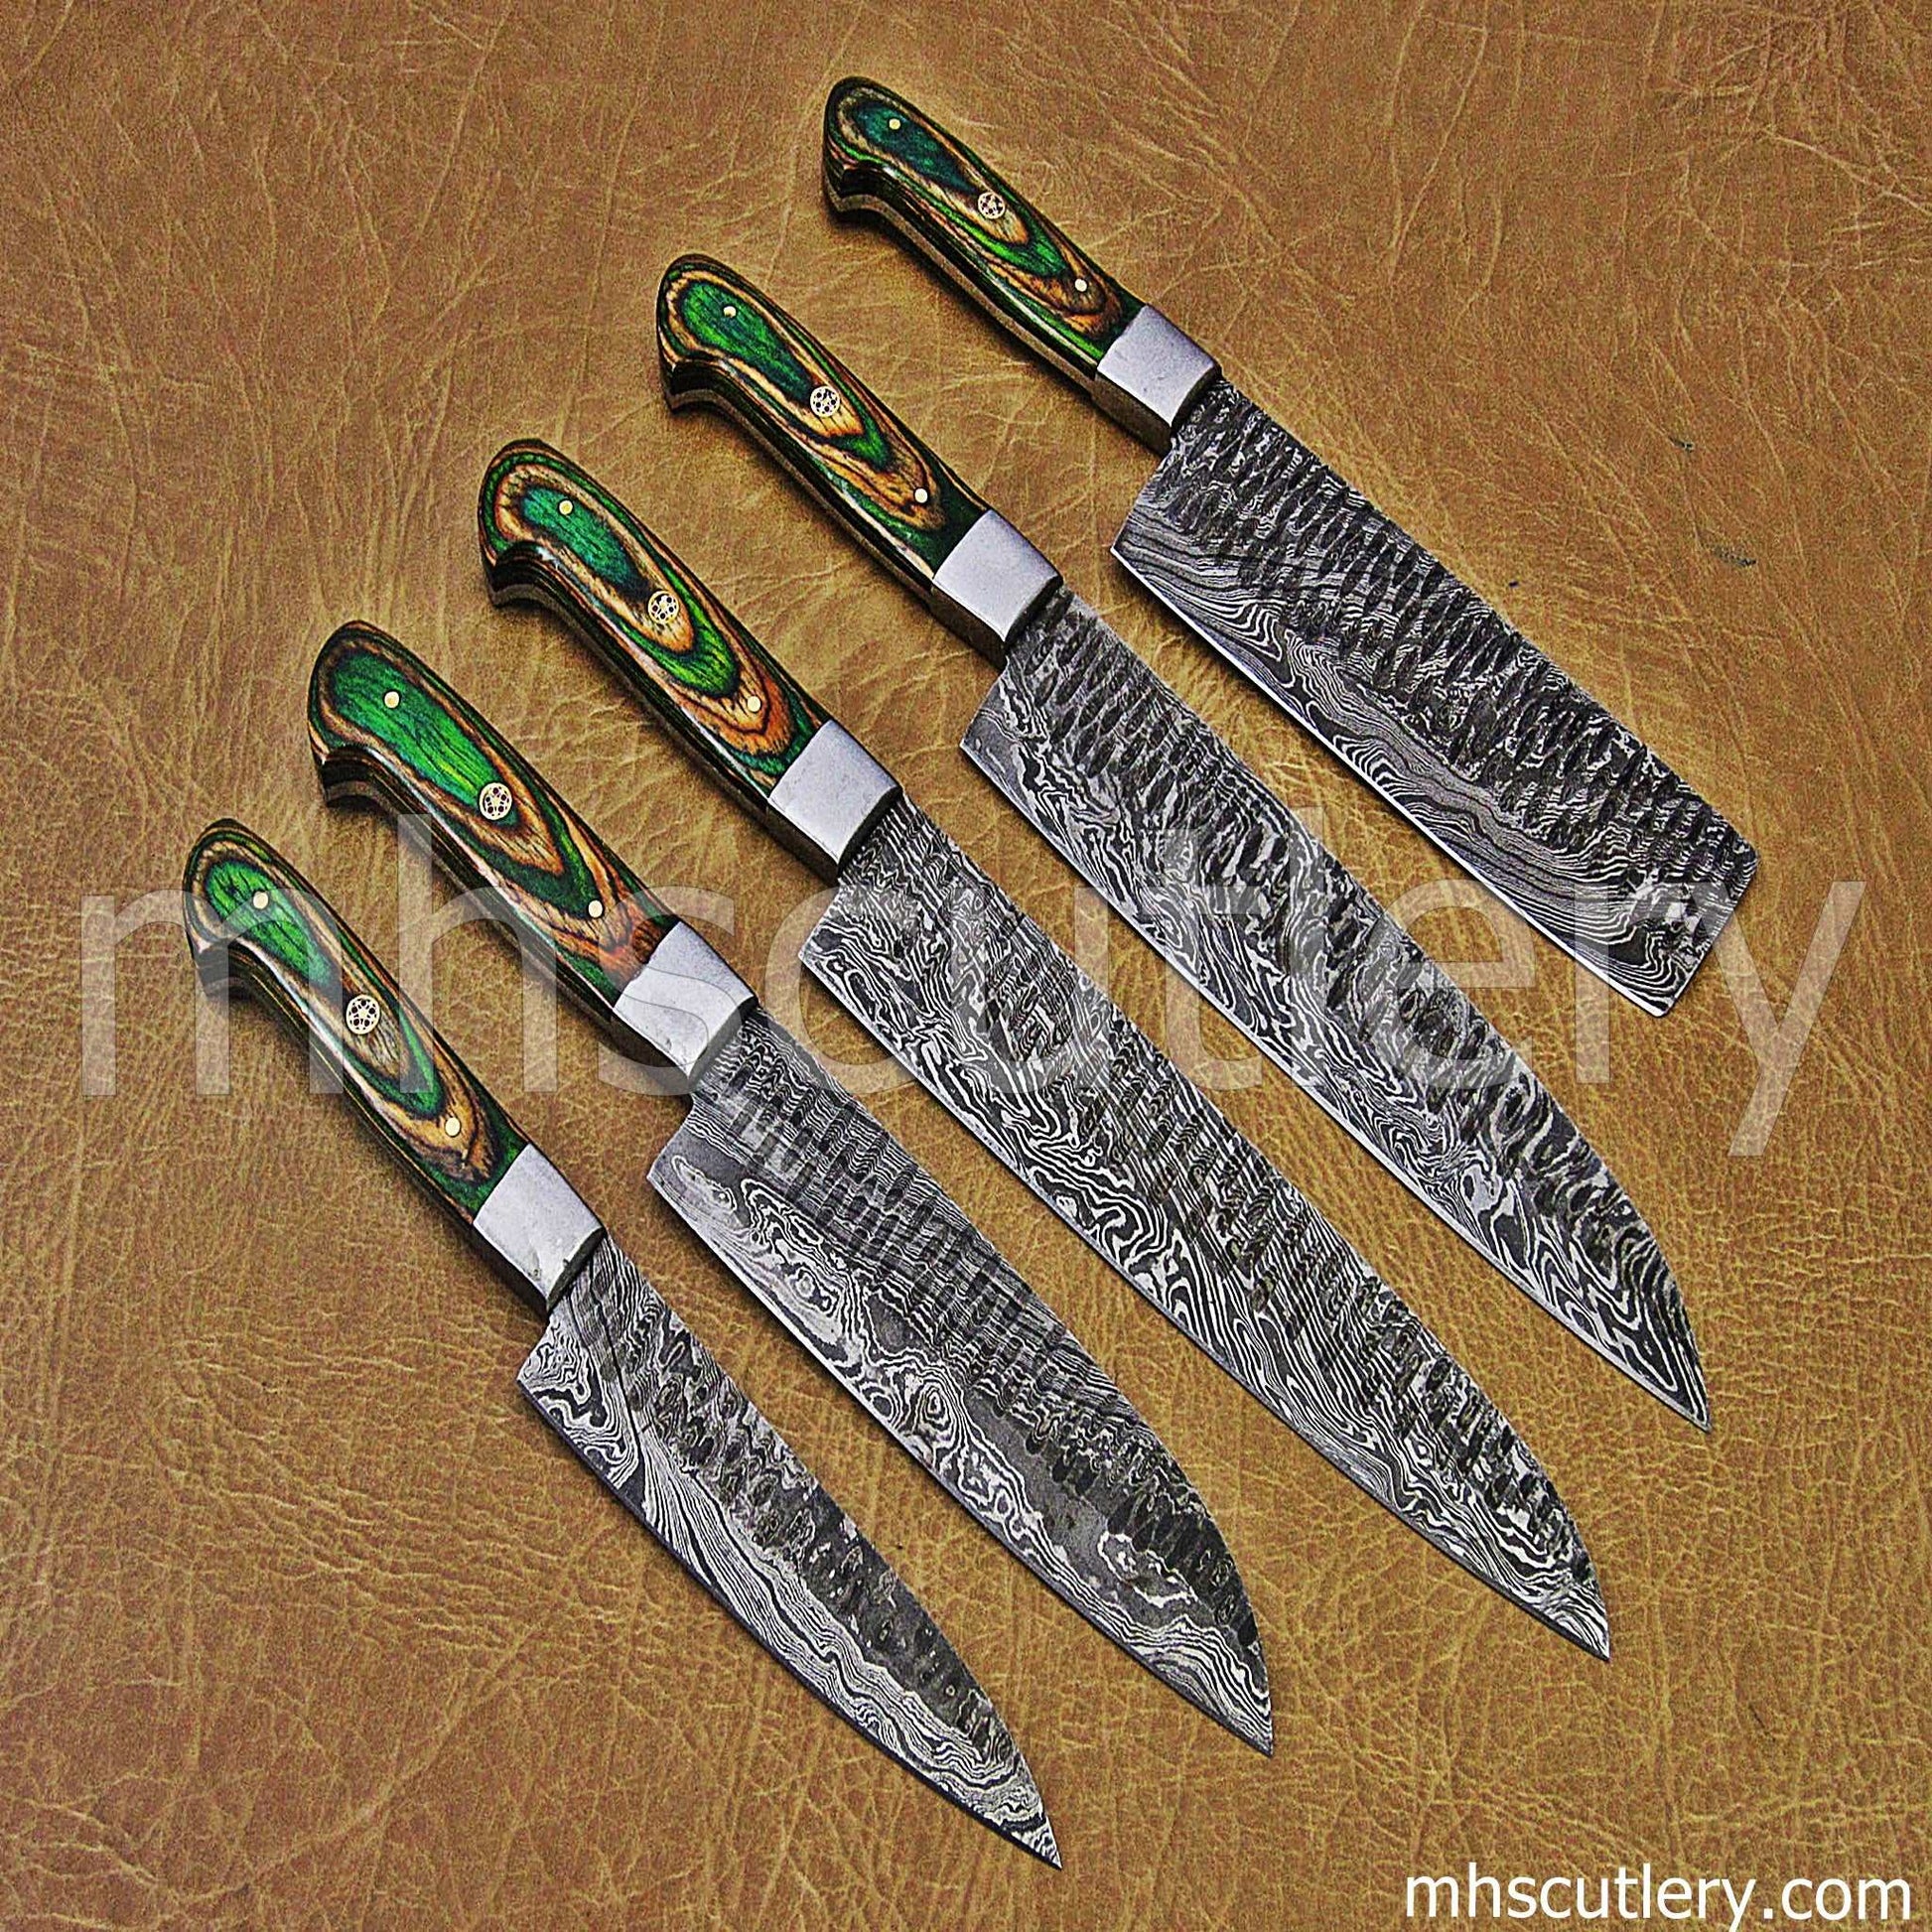 Custom Hand Forged Damascus Steel Chef Knives Set | mhscutlery